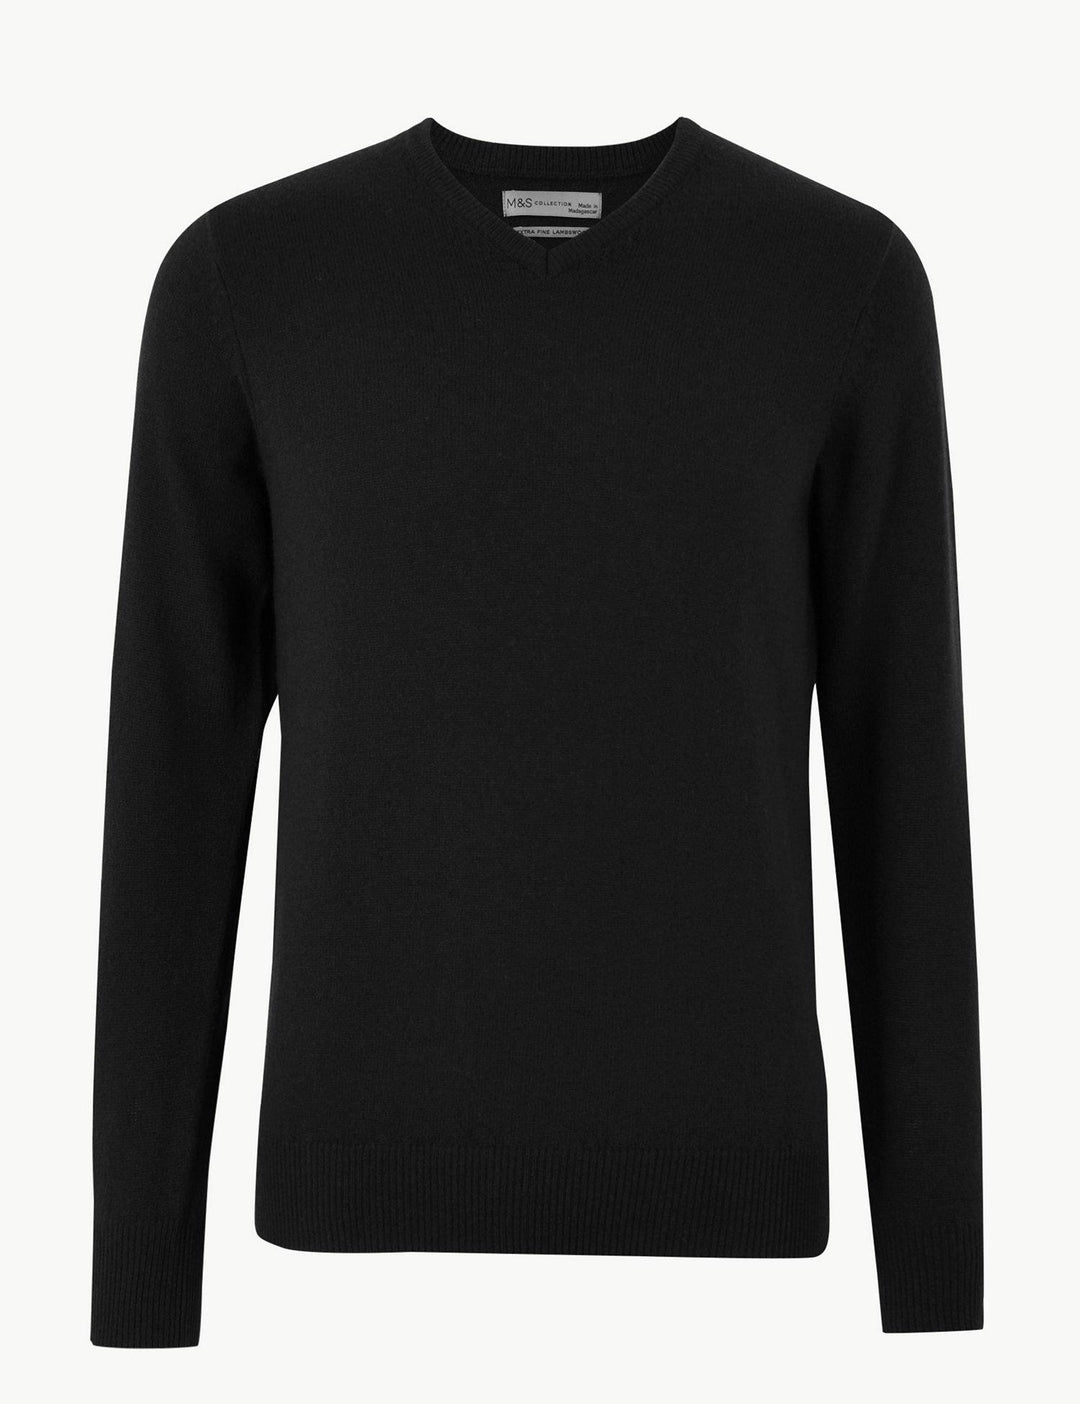 M&S Mens Lambswool V-Neck L/S Jersey T30/2653M